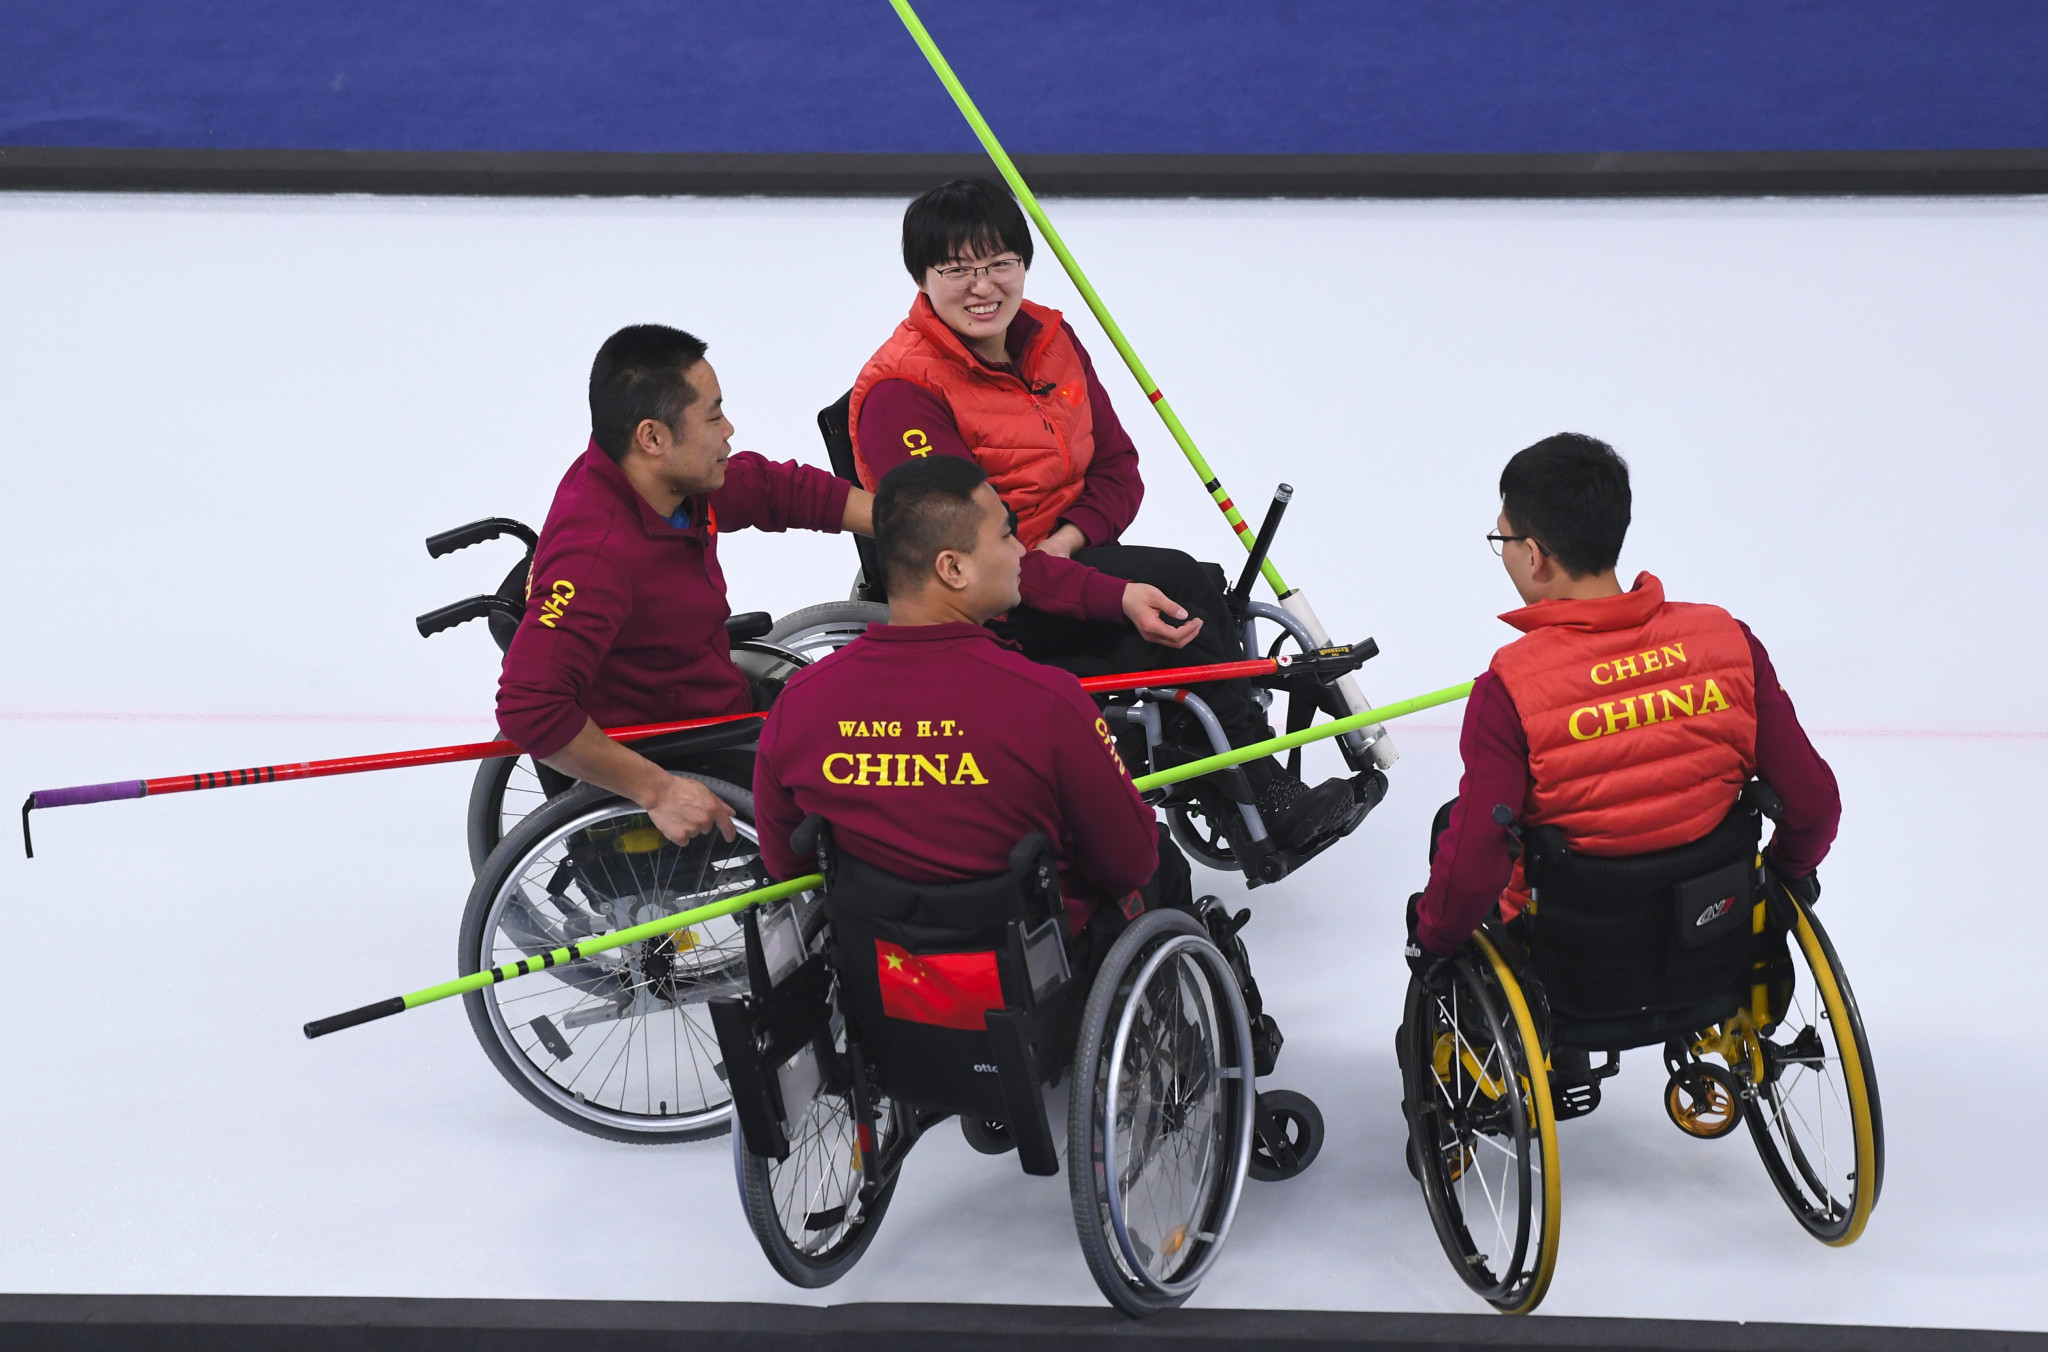 China beat Norway in the Paralympic final in Pyeongchang ©Getty Images